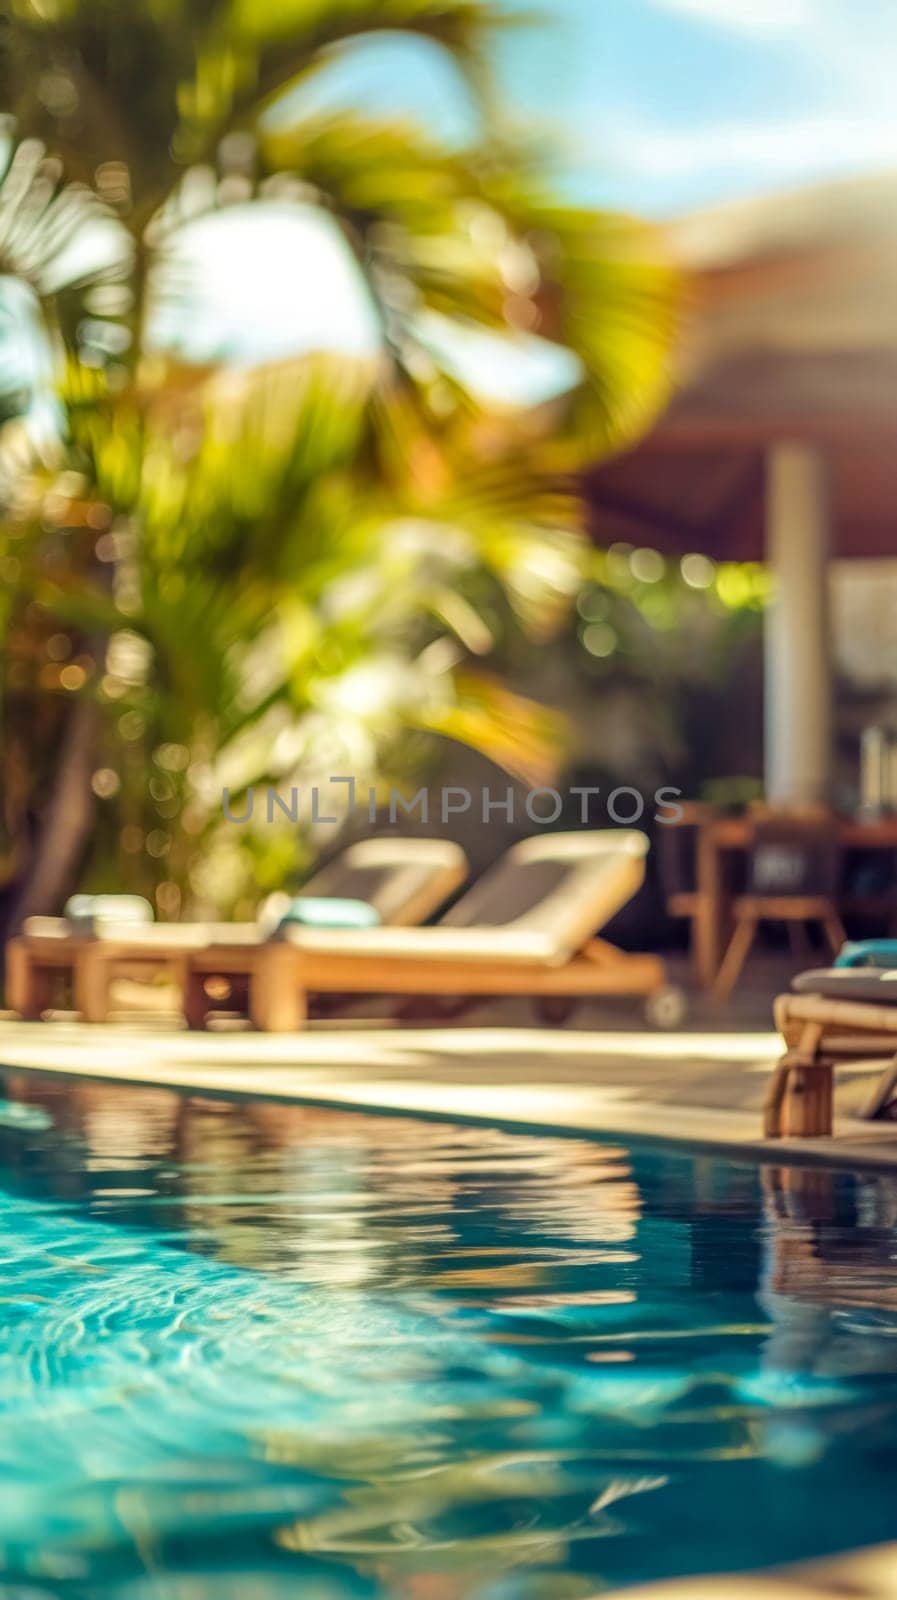 A tranquil and luxurious poolside blurred in the foreground with sun loungers in the background, nestled among lush tropical foliage basking in the sun's warm glow. vertical